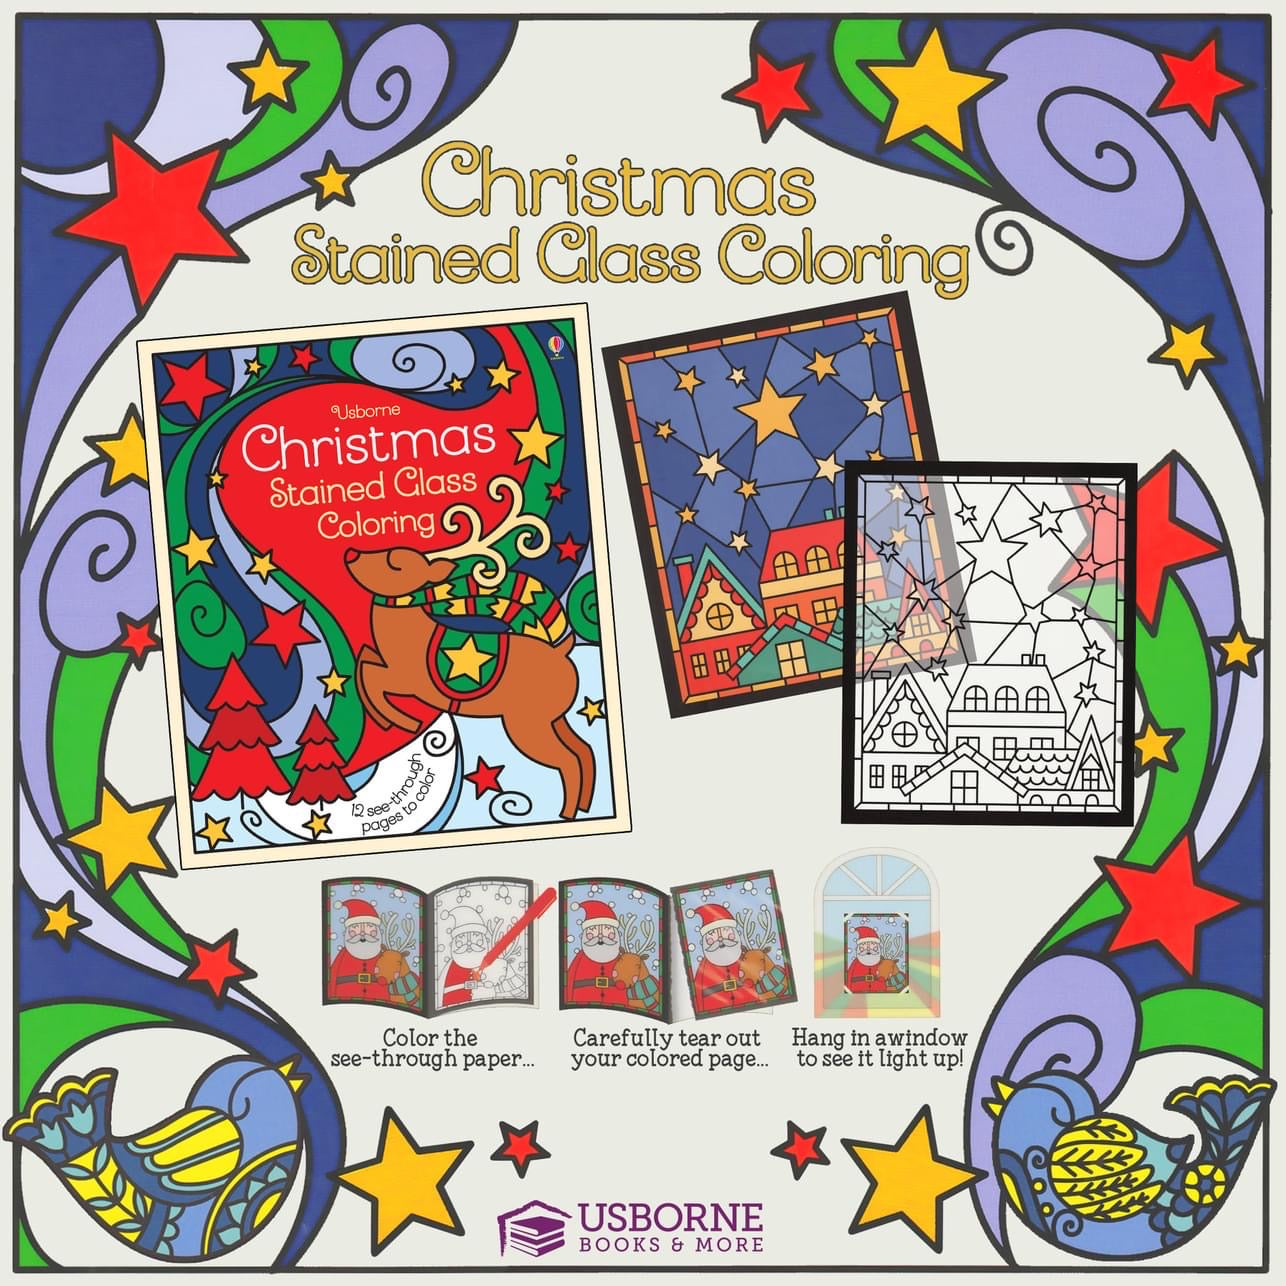 Christmas stained glass coloring â little book buzz